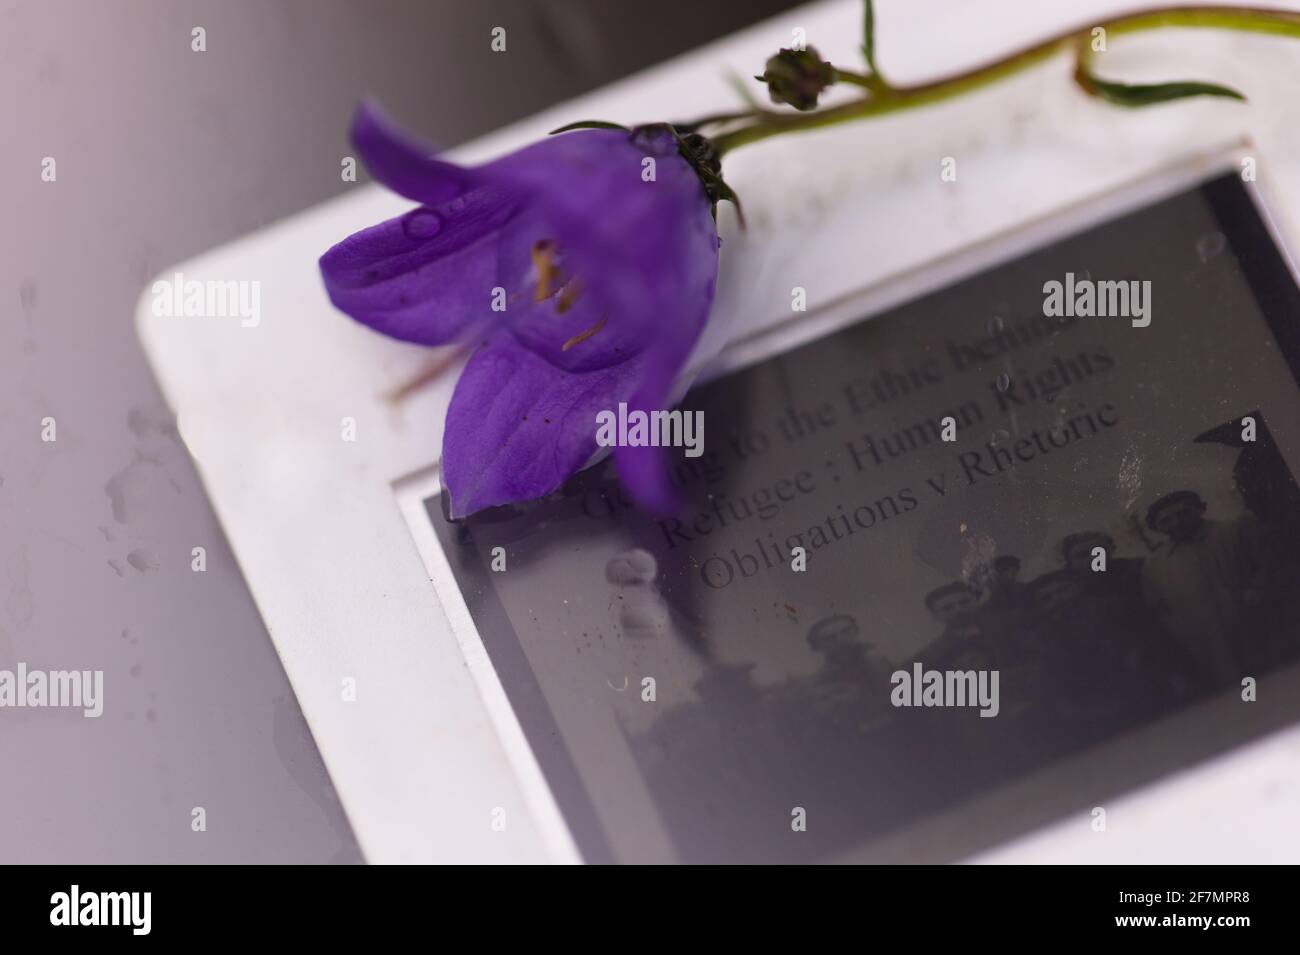 Concept - Human Rights Protection for for individuals fleeing persecution - a single violet flower on a glass slide Stock Photo